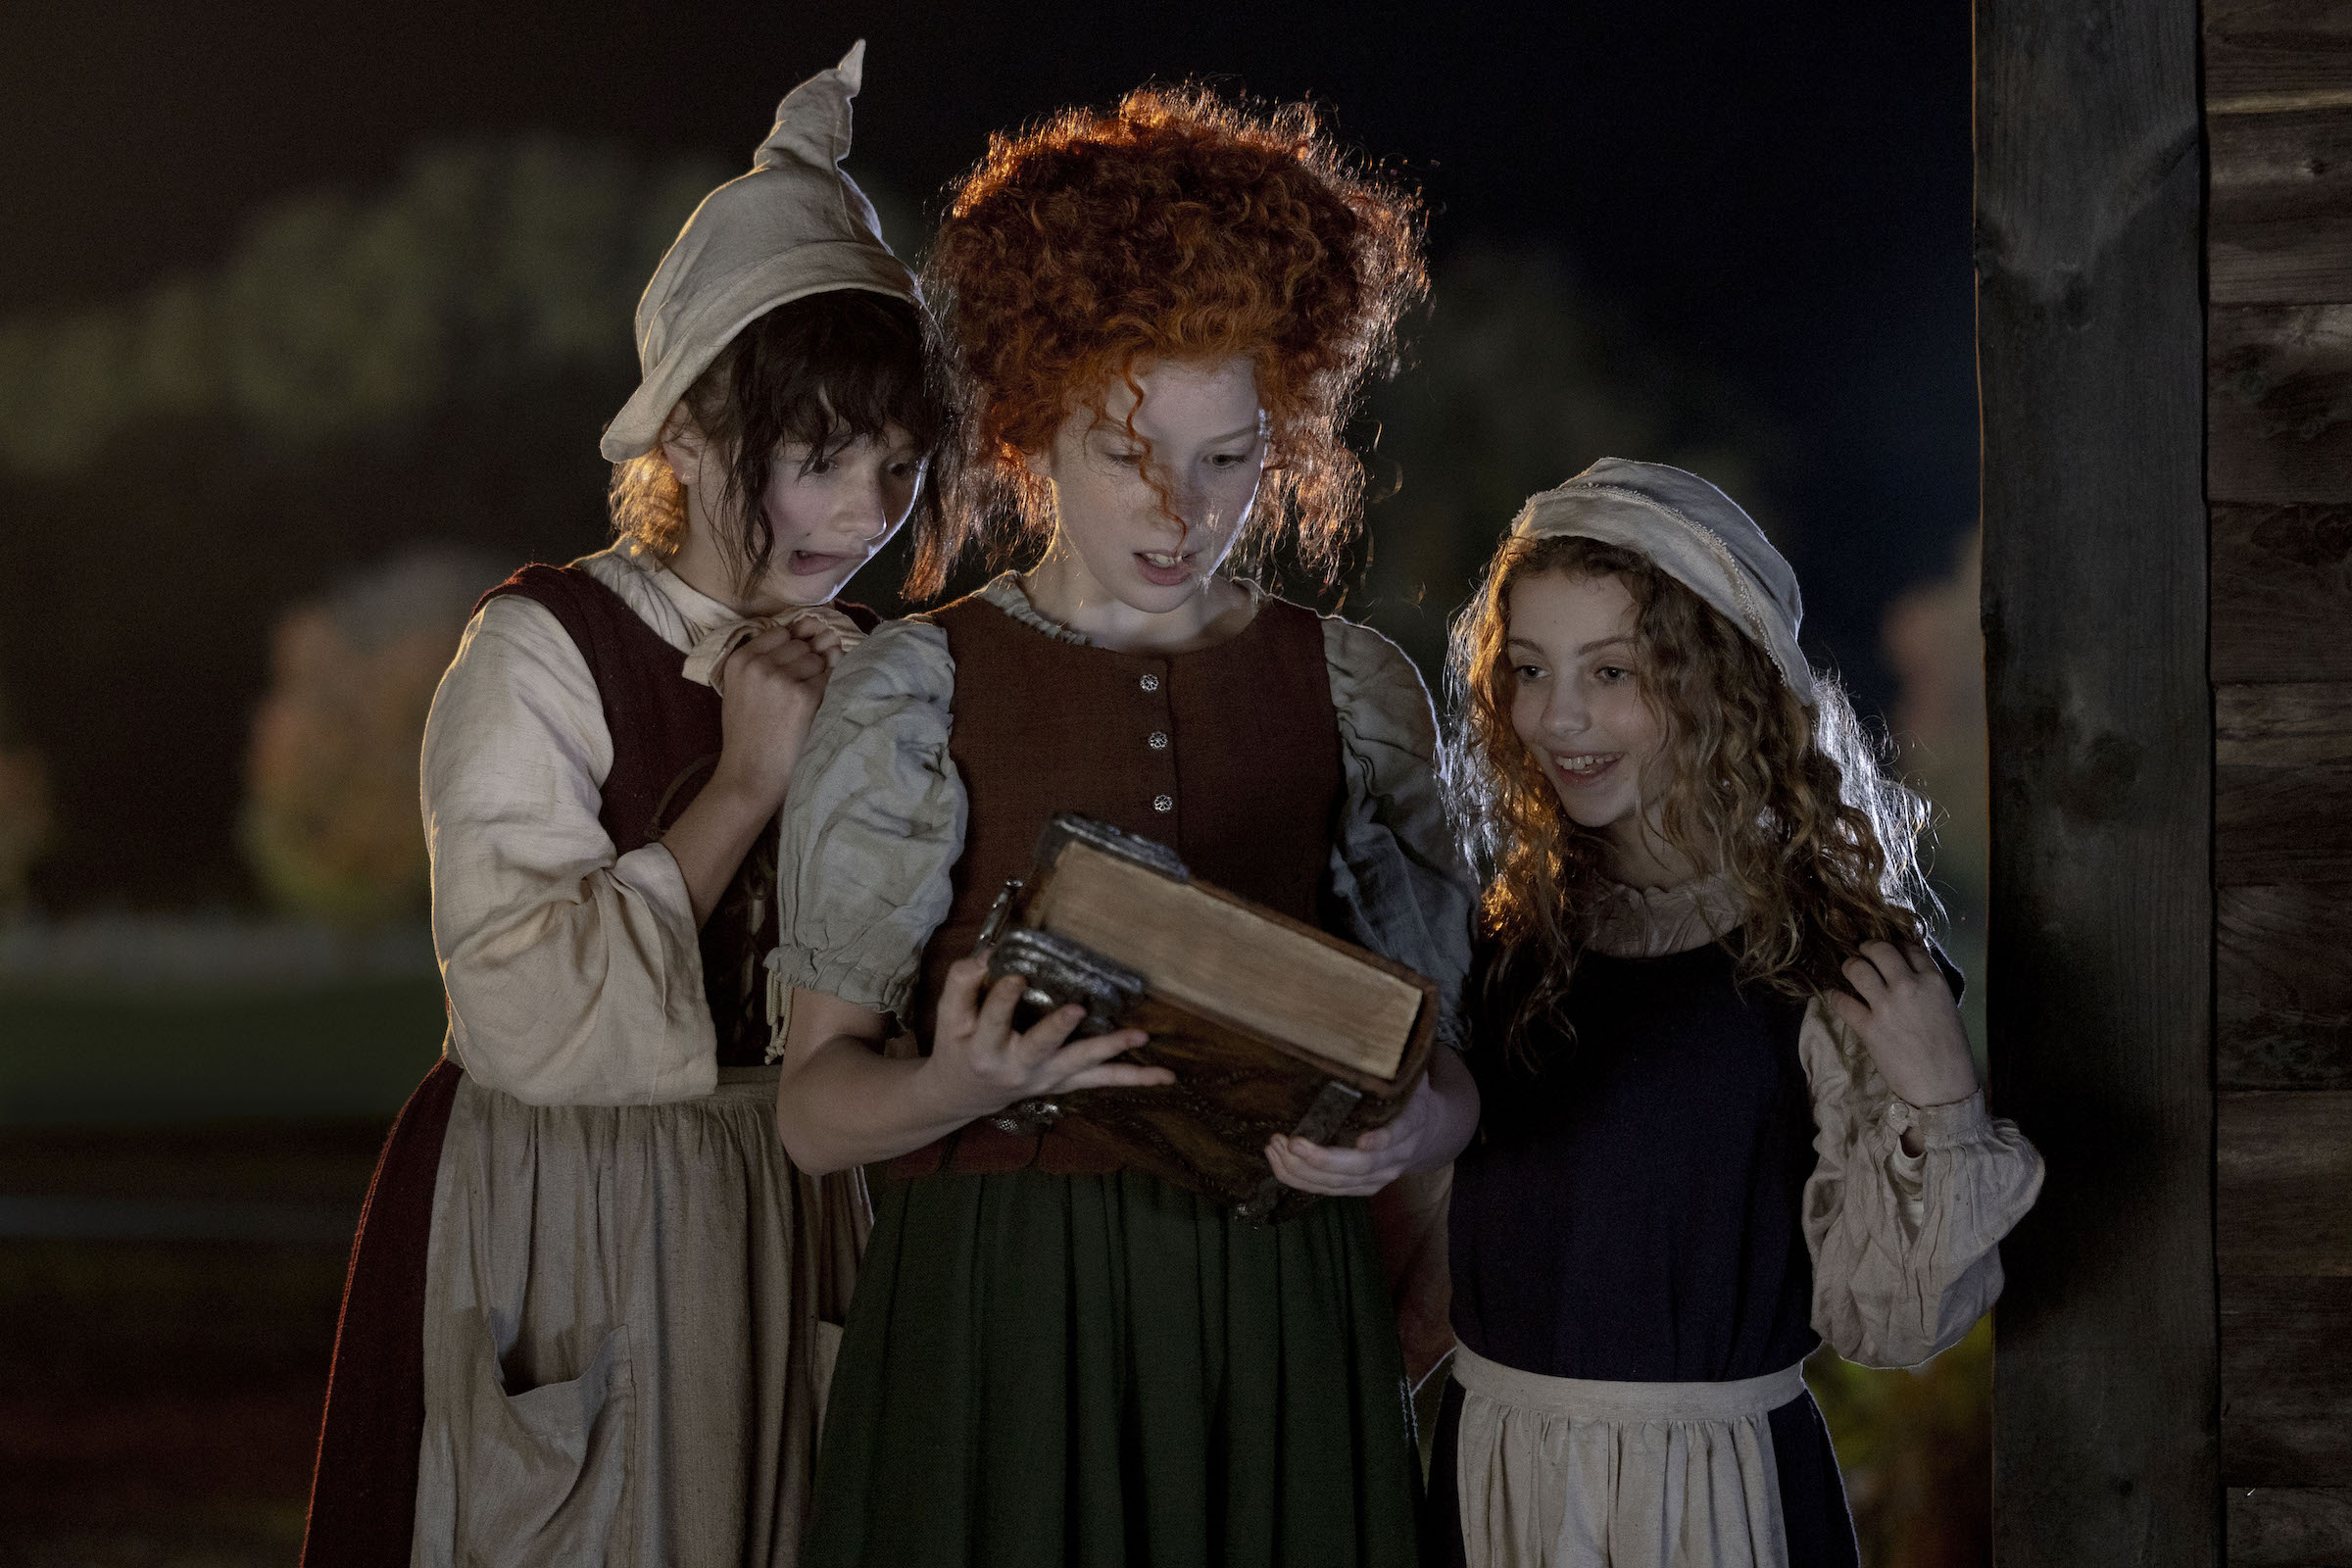 Nina Kitchen as Young Mary, Taylor Henderson as Young Winnie, and Juju Brener as Young Sarah in 'Hocus Pocus 2' (Matt Kennedy—Disney Enterprises, Inc.)